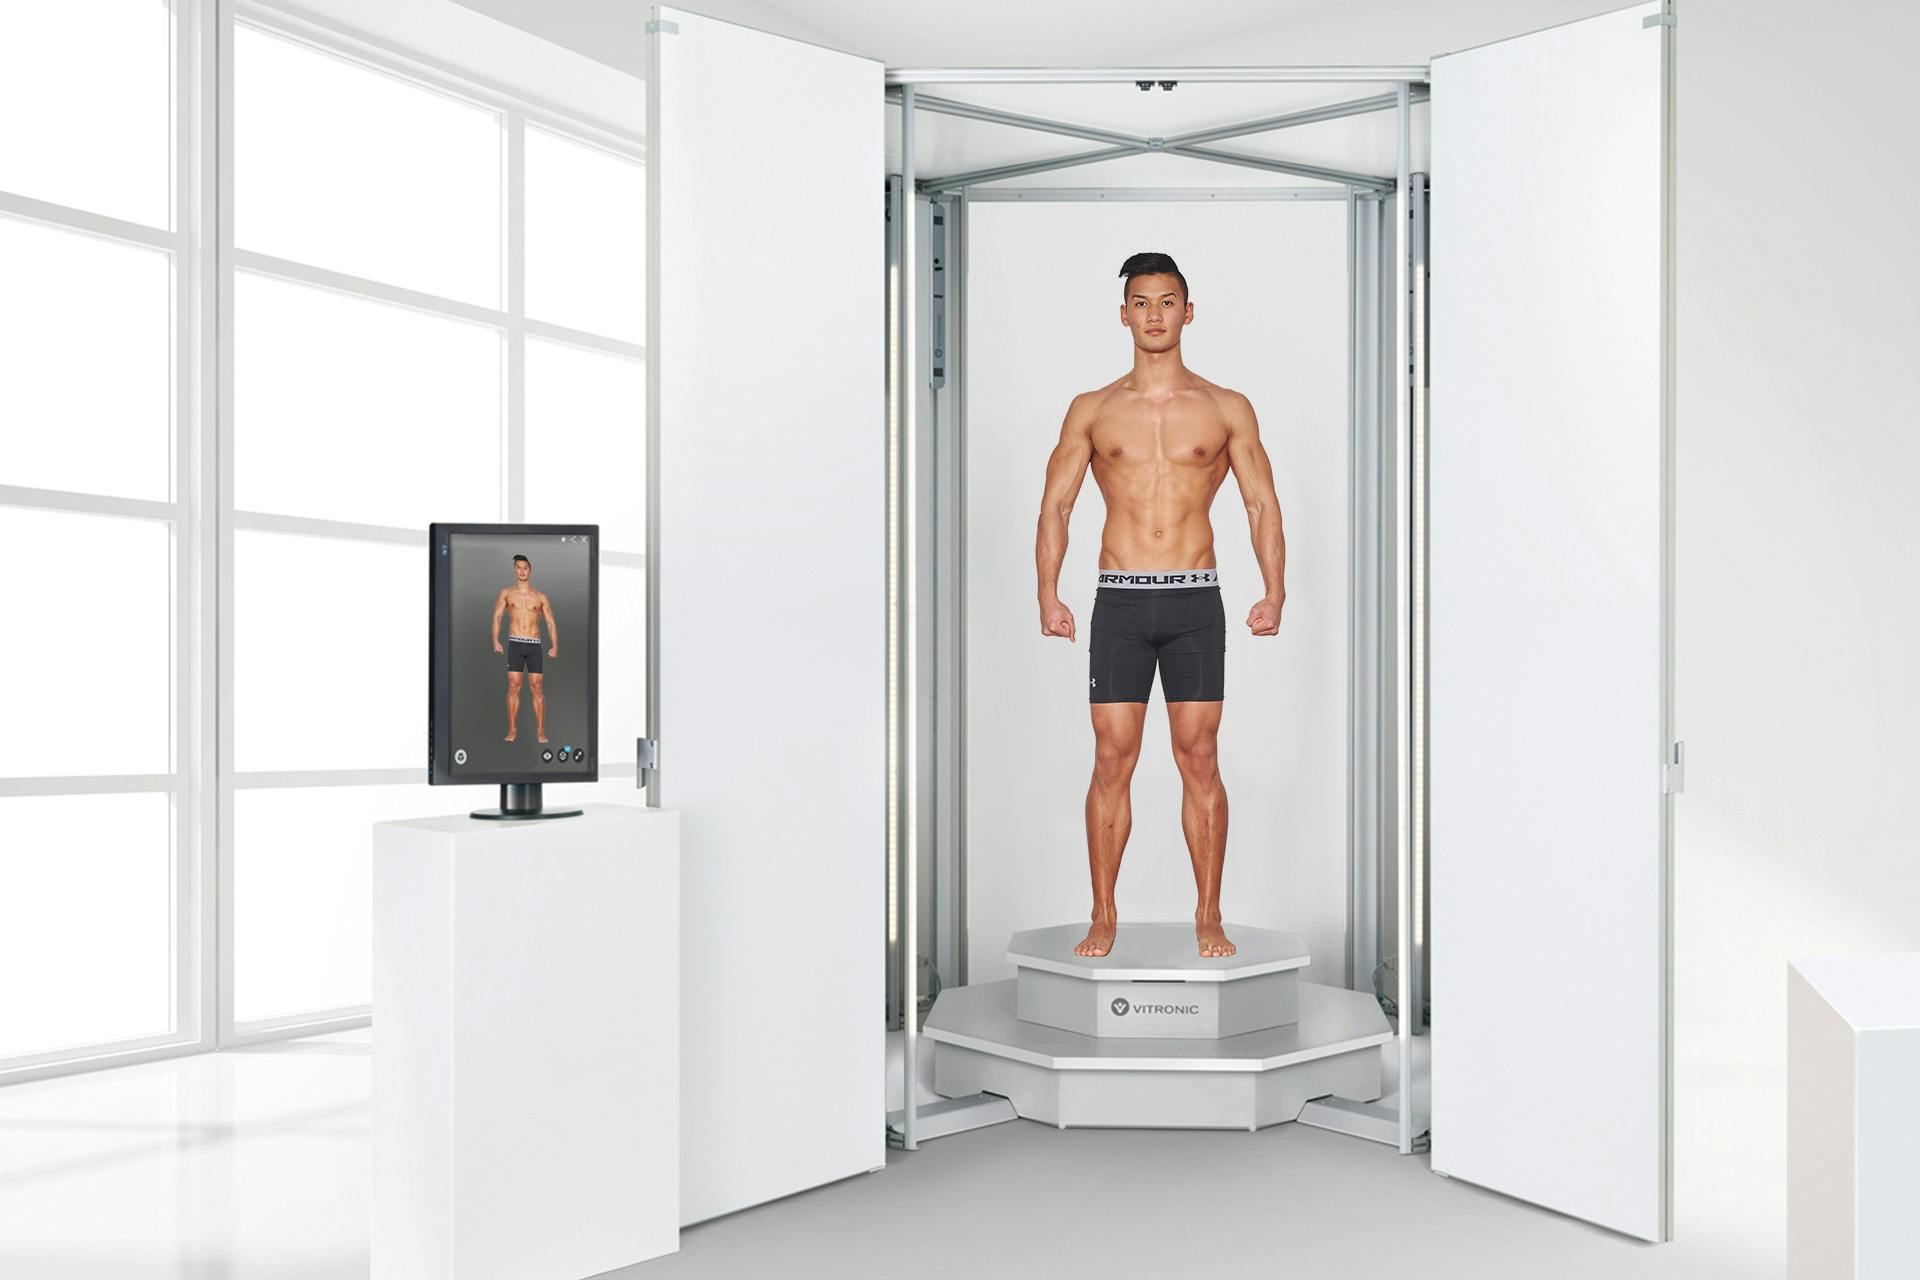 Medical body scanners provide meaningful performance data.